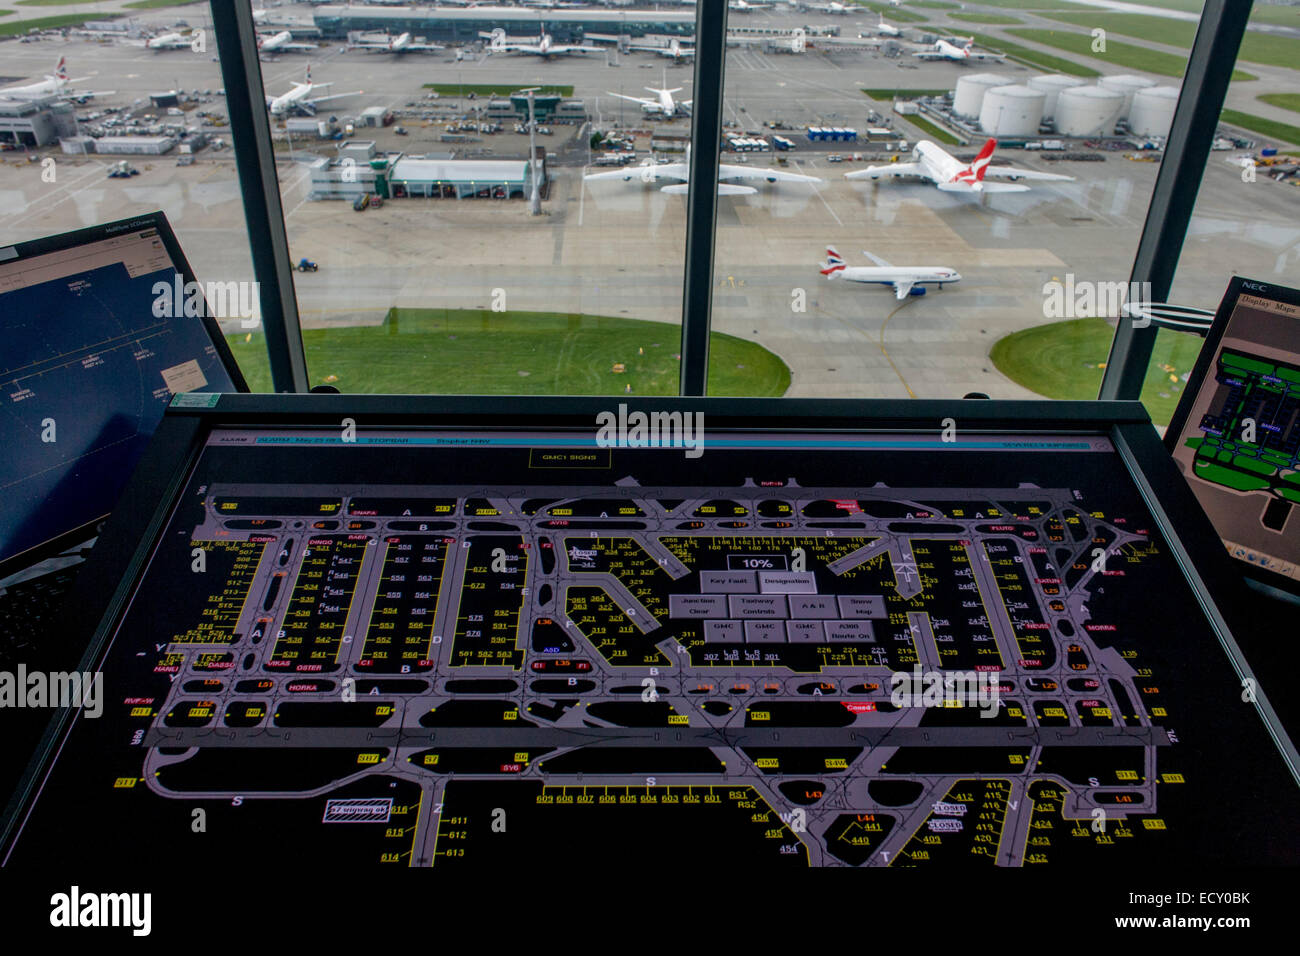 Detail of NATS air traffic controllers' screen plan of ground operations, in control tower at Heathrow airport, London. Stock Photo